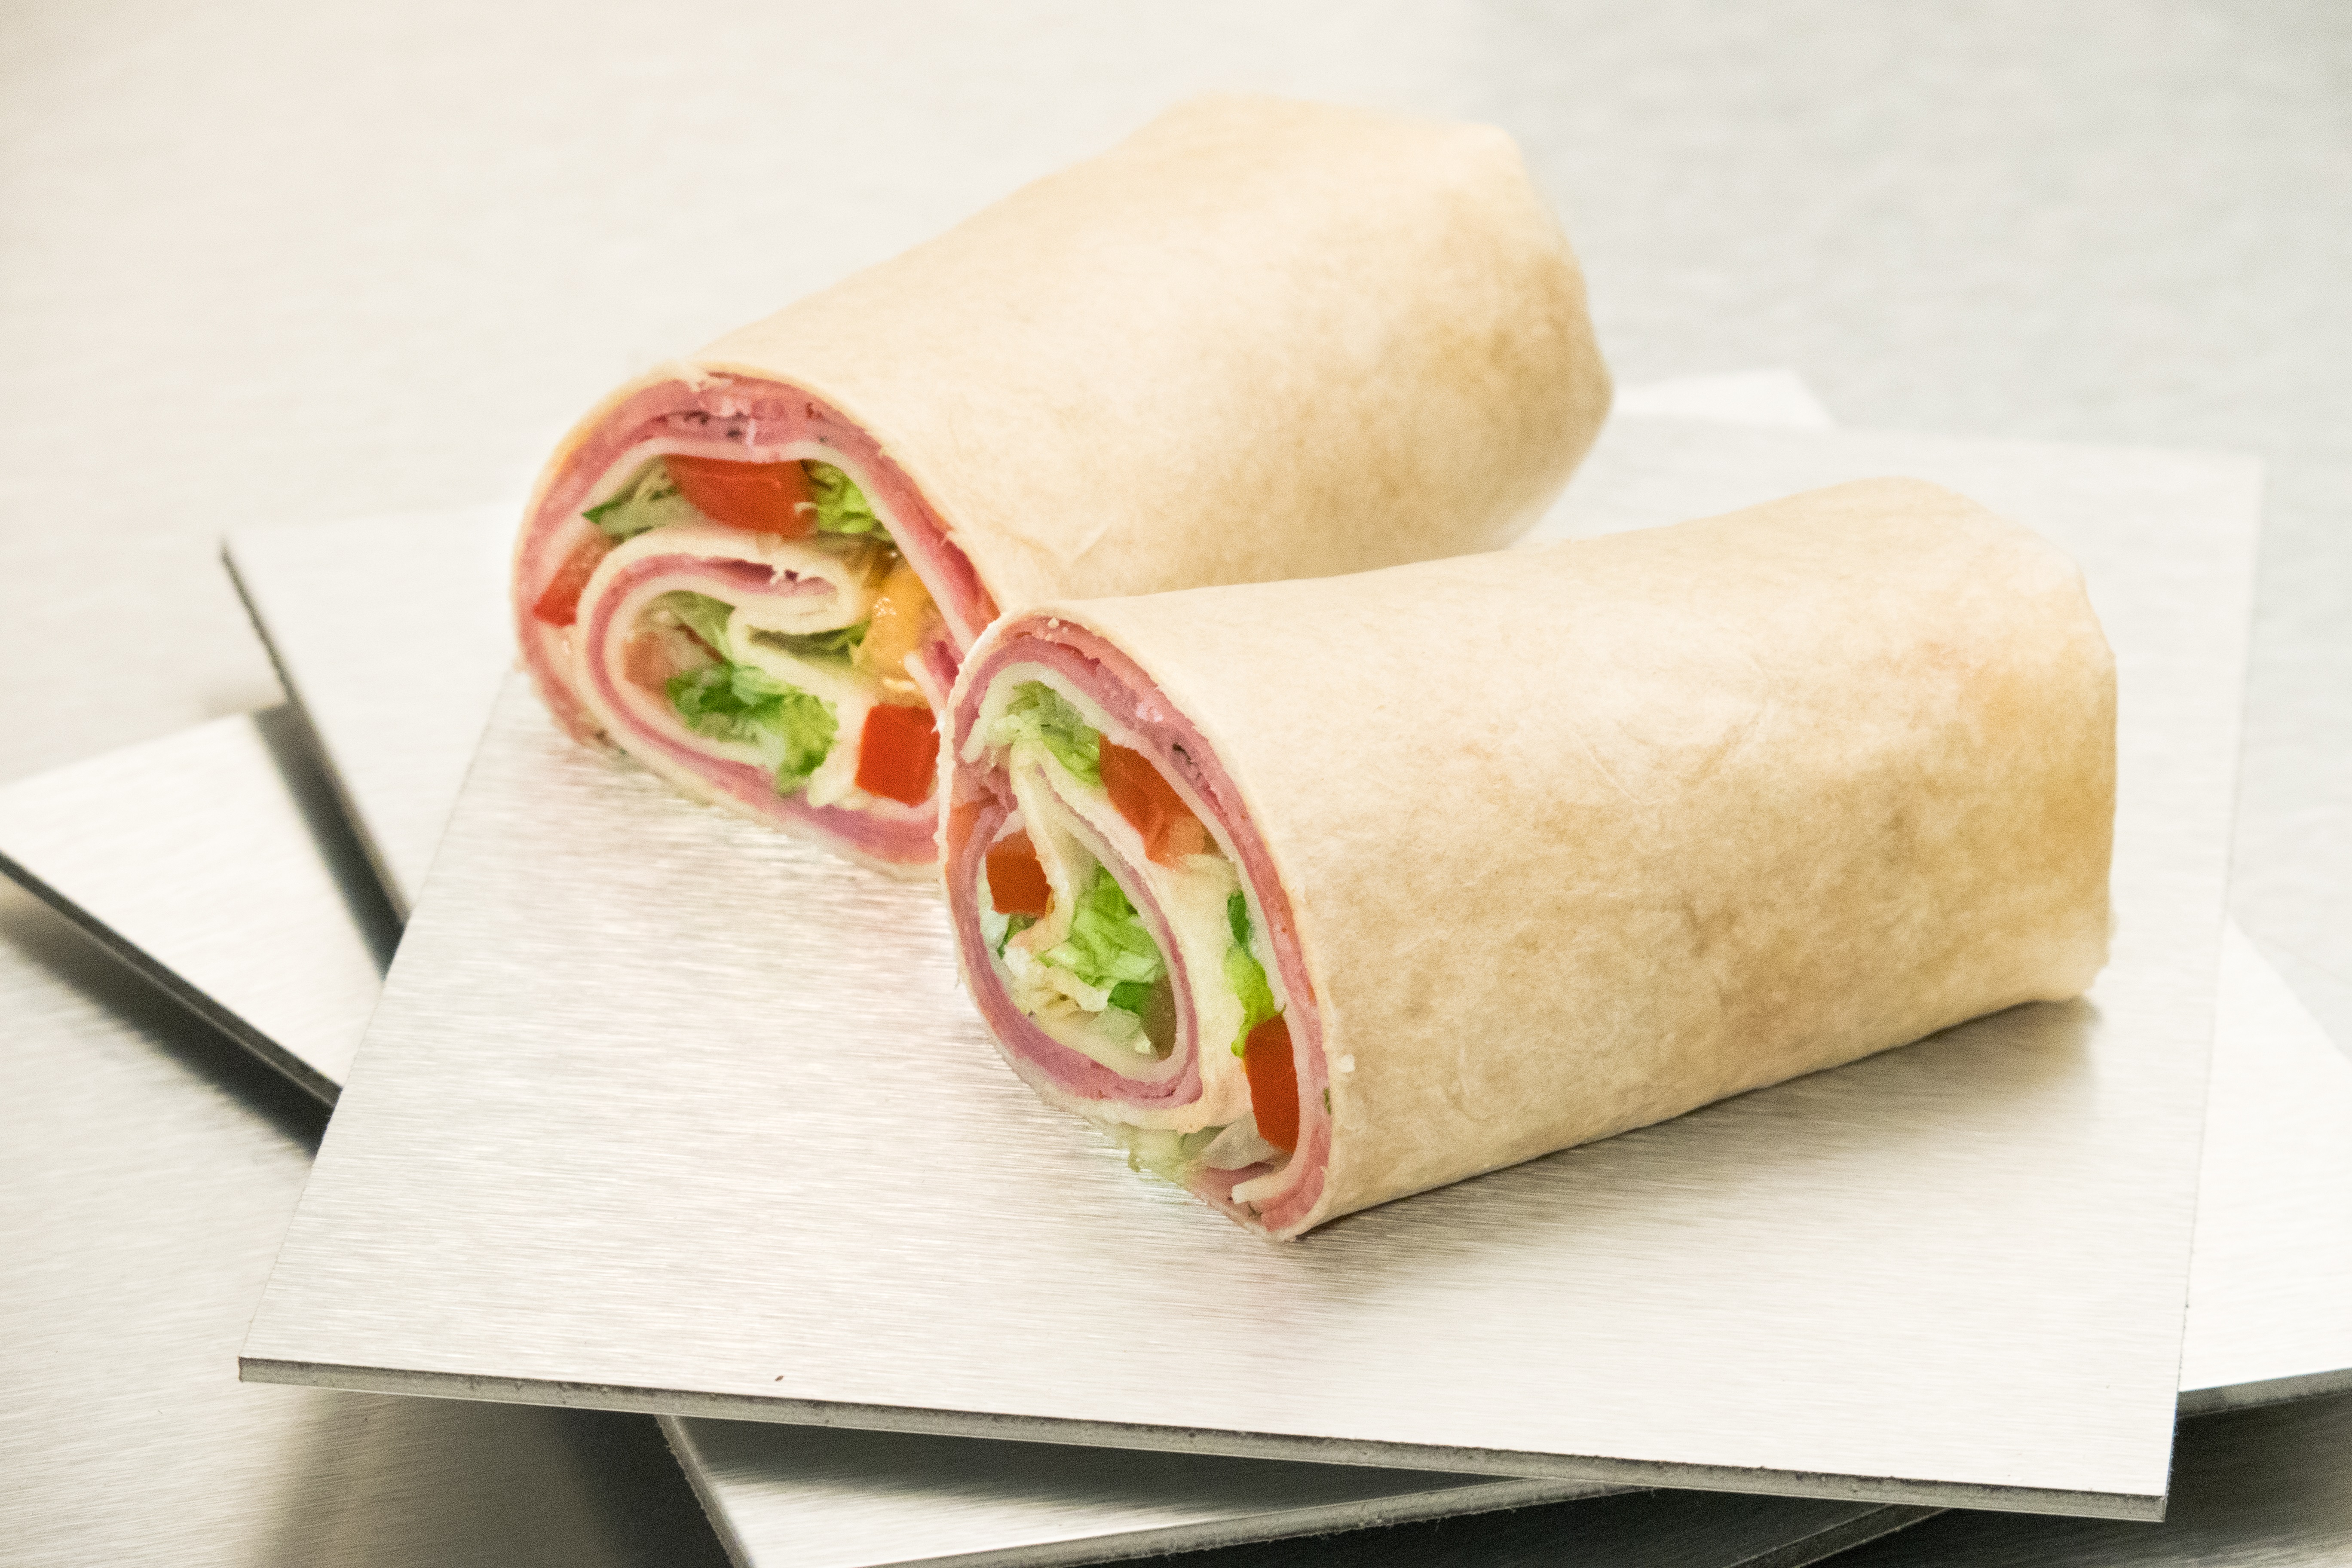 Our wrap selection